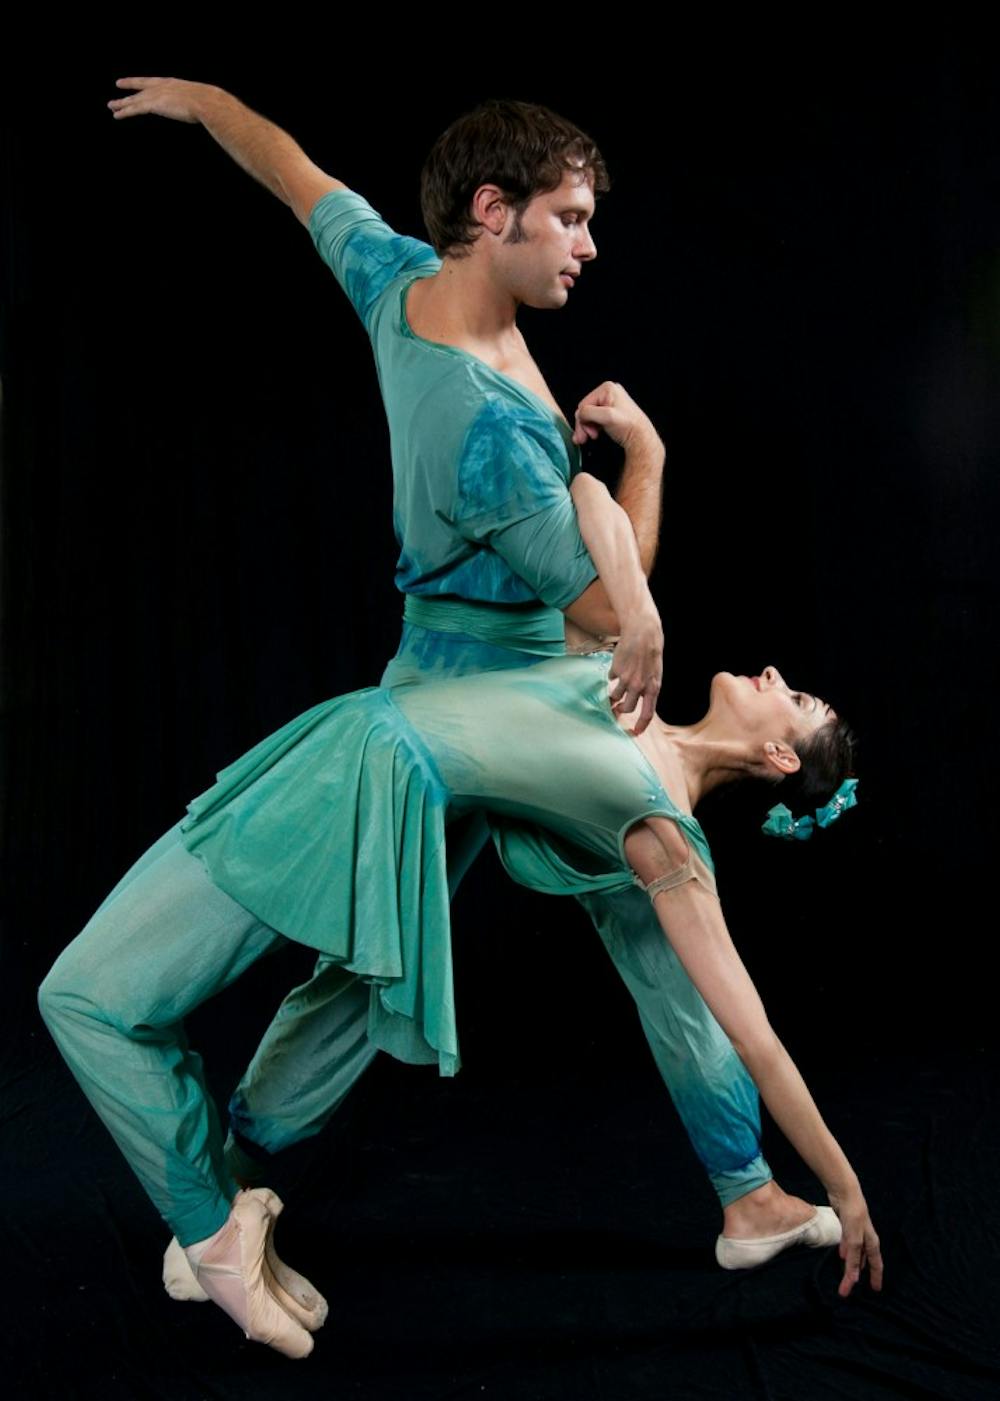 	<p>The <span class="caps">USC</span> Dance Company will tiptoe and twirl through time for their three-part ballet performance &#8216;Classics Over Time&#8217; showing Nov. 14 and 15 at the Koger Center.</p>